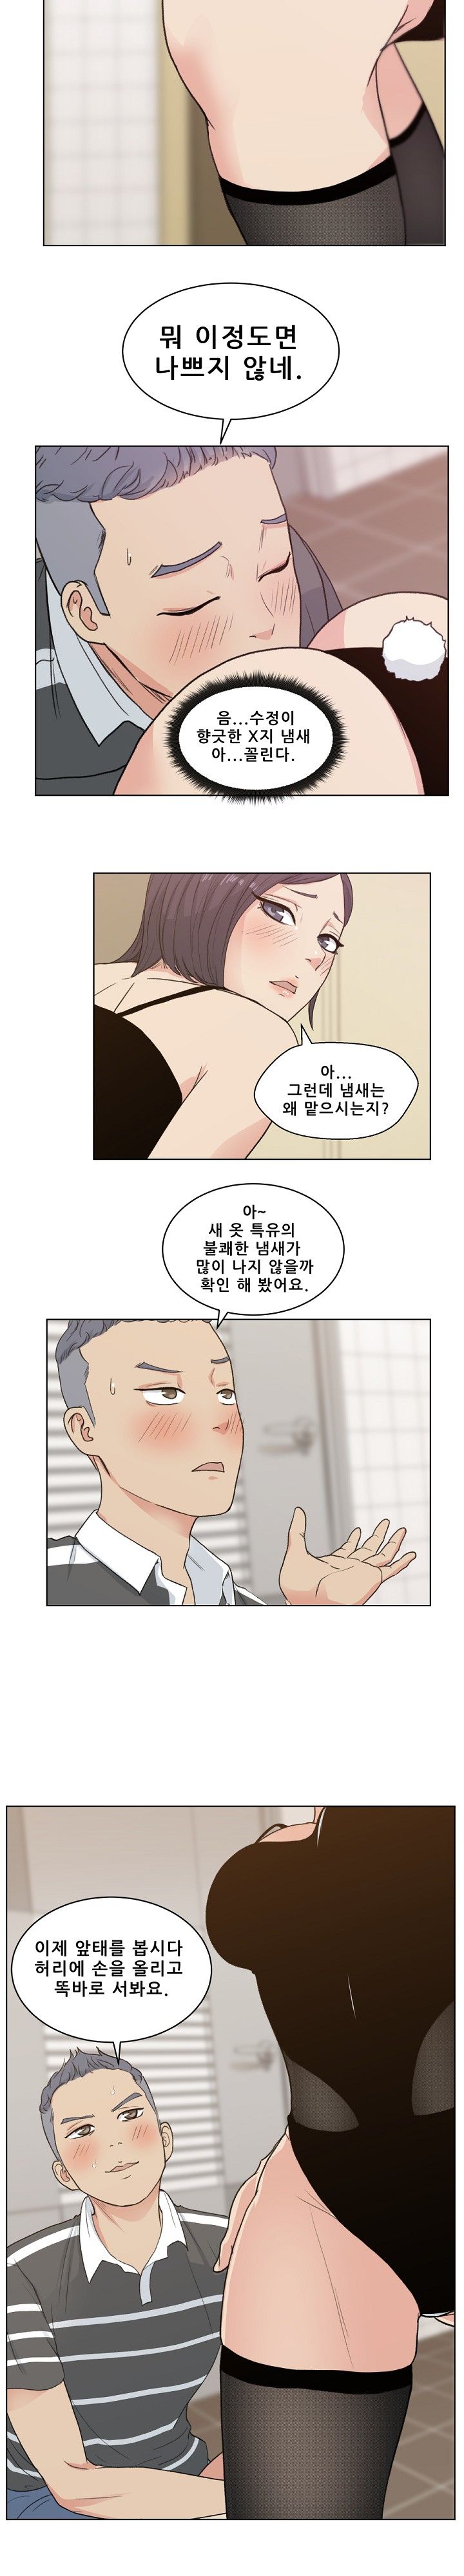 Sooyung Comic Shop Raw - Chapter 4 Page 15